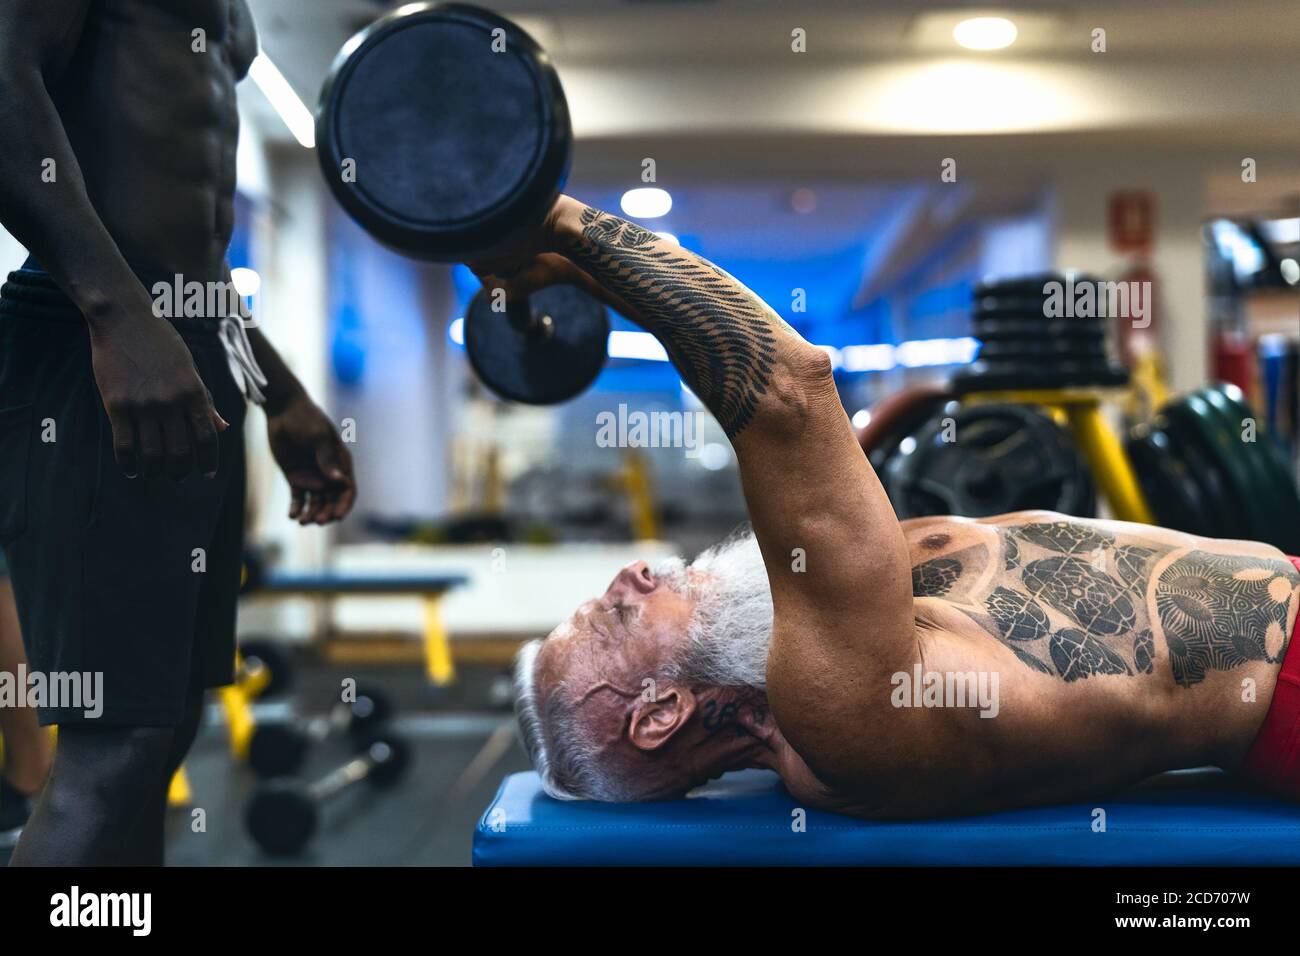 Senior fit man weight lifting with personal trainer in gym sport club - Mature bodybuilder doing workout session Stock Photo